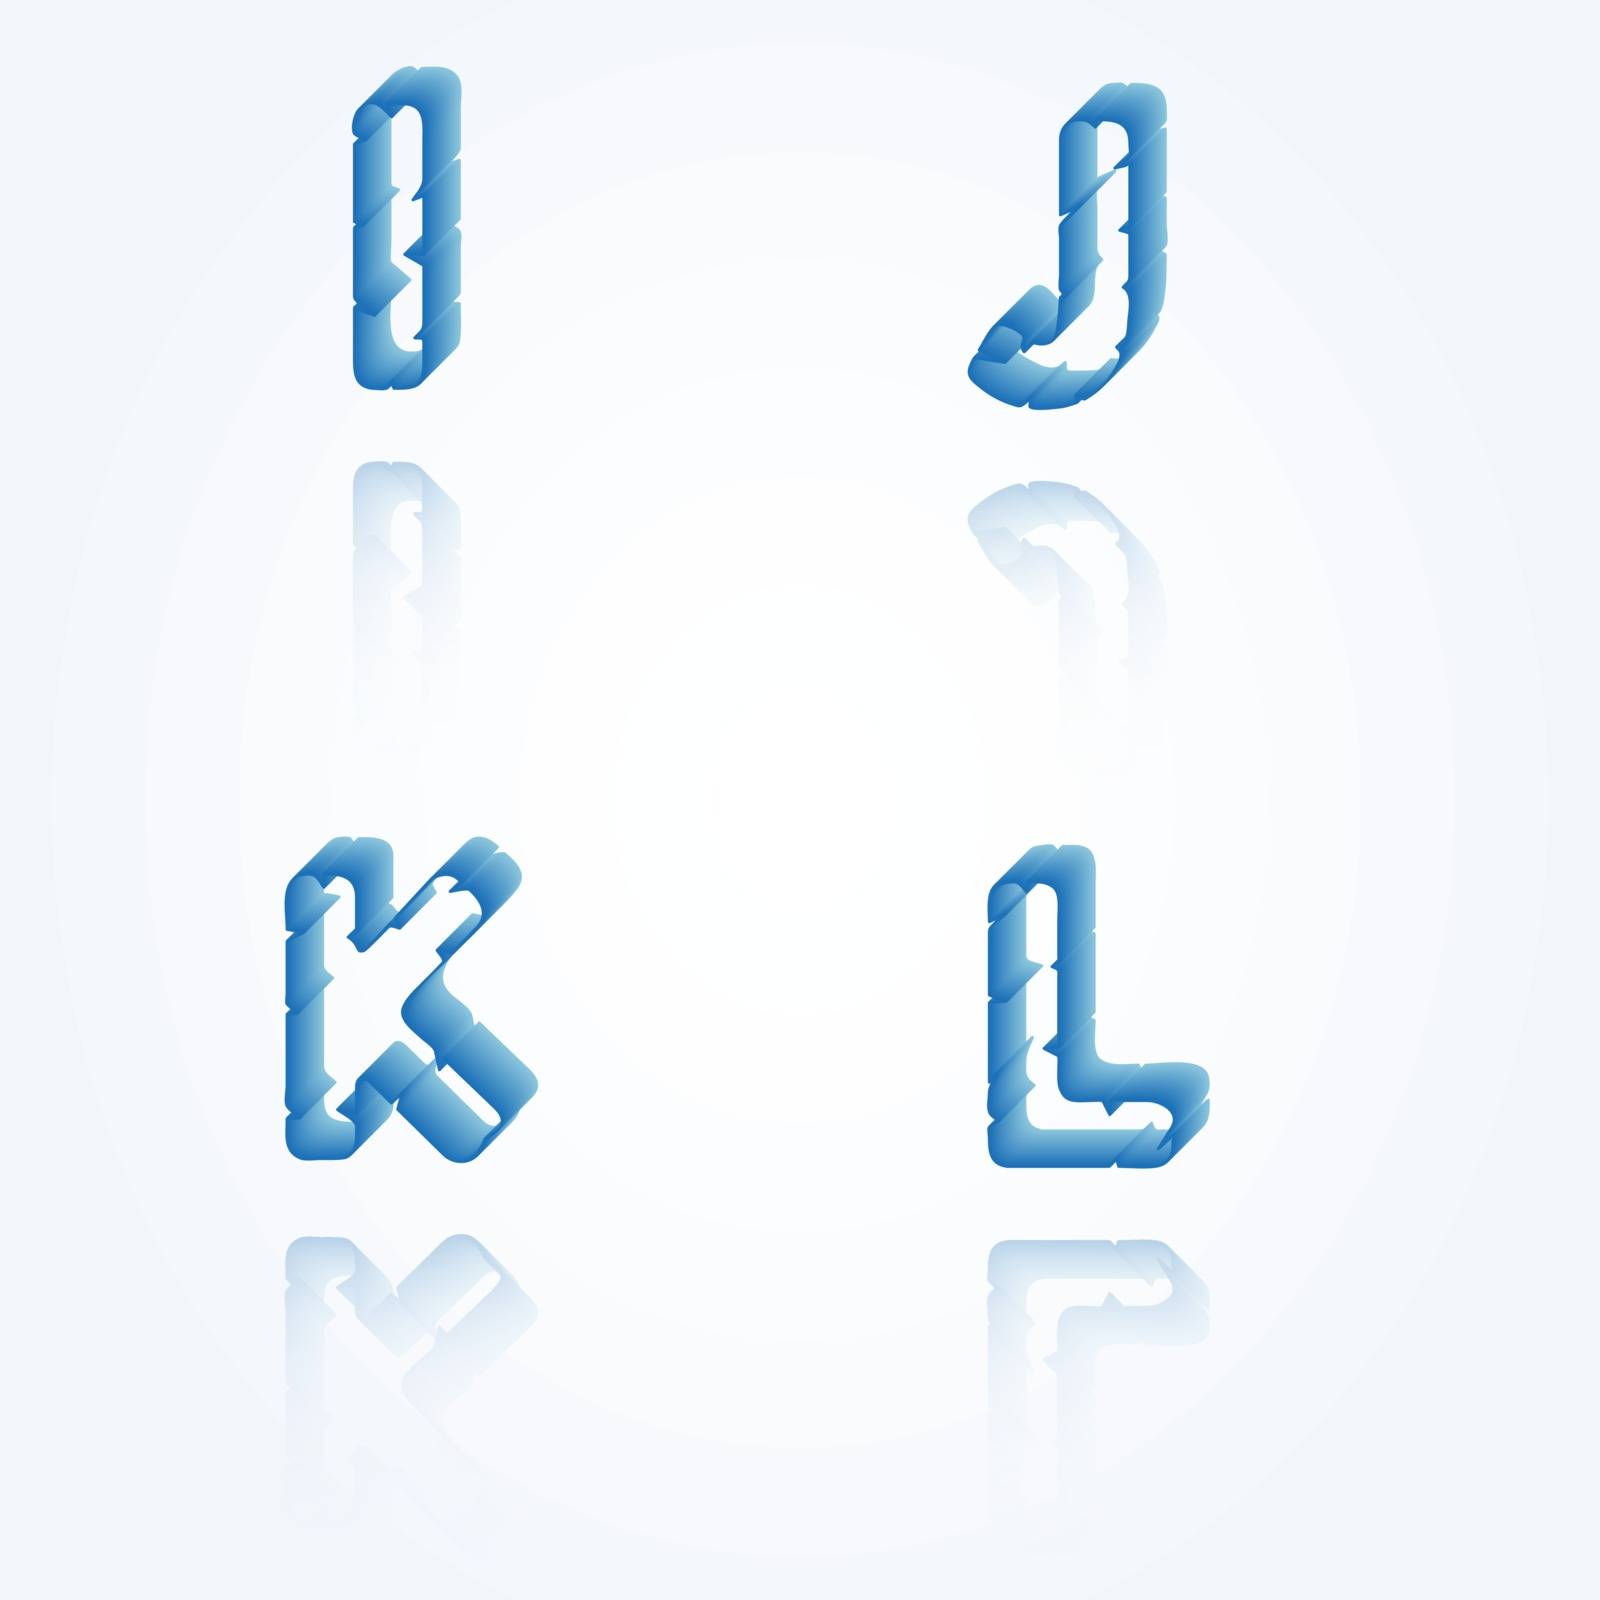 sketch jagged alphabet letters with 3d effect and shadow on white background, I, J, K, L